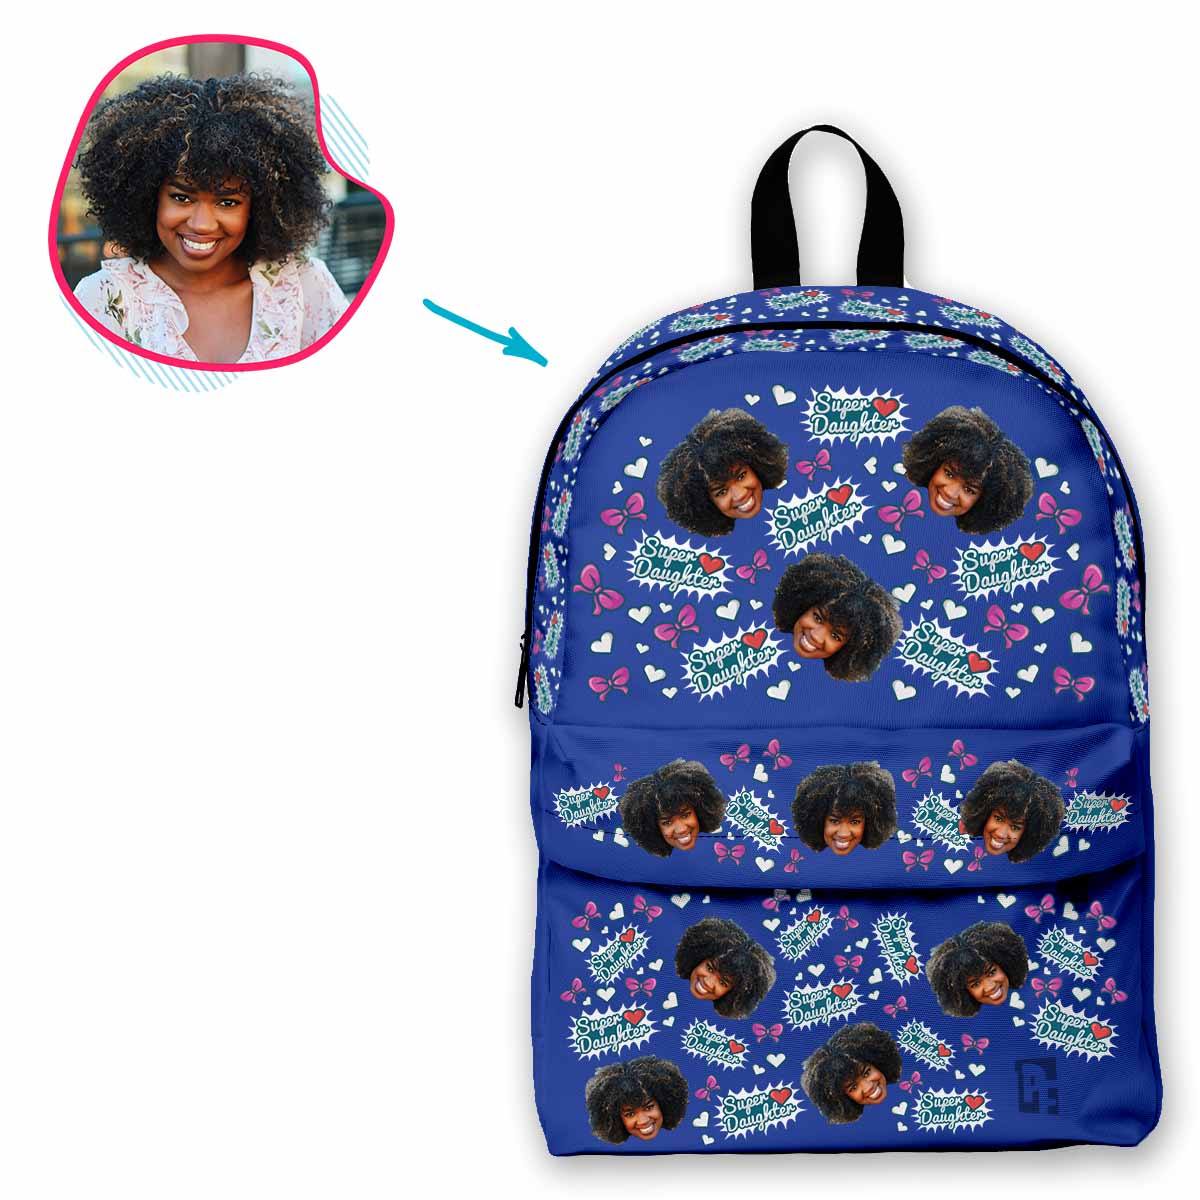 darkblue Super Daughter classic backpack personalized with photo of face printed on it